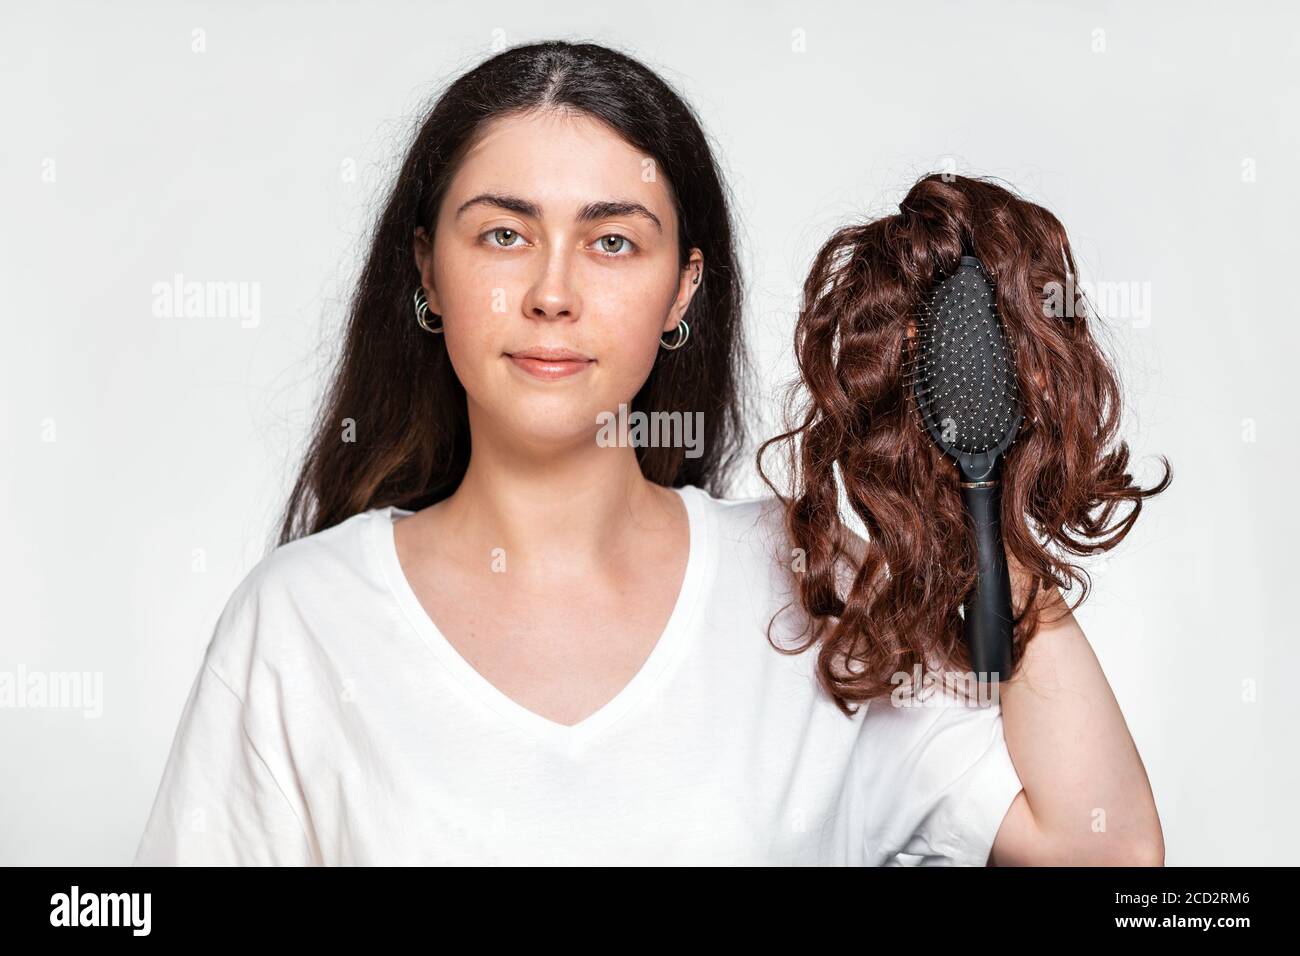 Portrait of a pretty woman holds a comb with a wig on it. White background. Concept of hair care and hair loss. Stock Photo